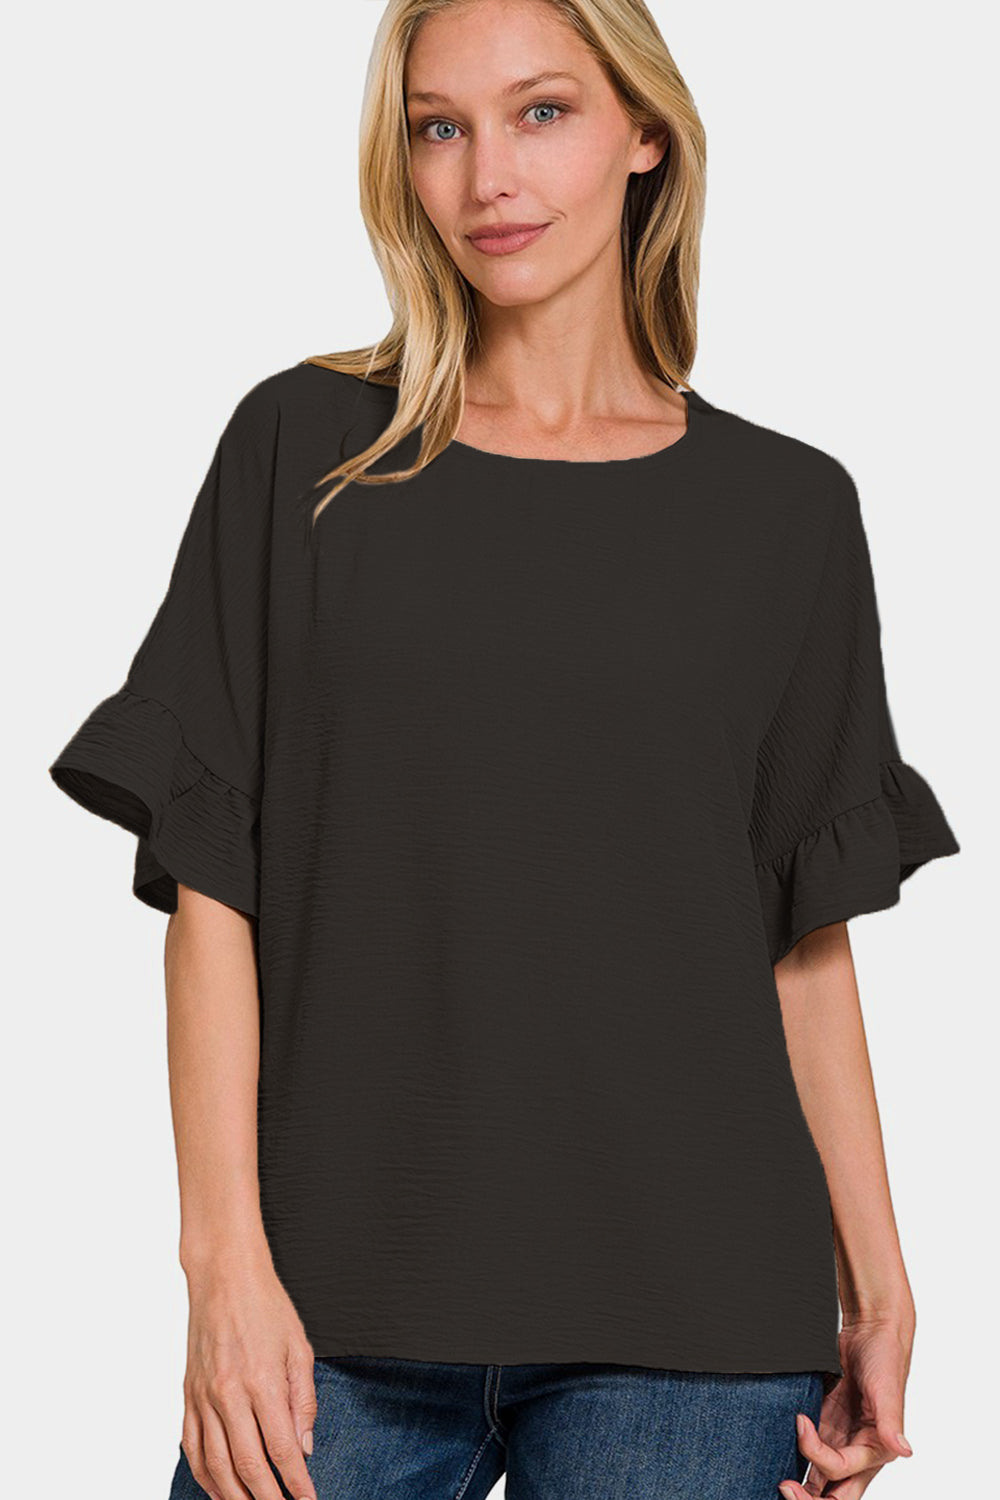 This V-Neck Flutter Sleeve Top is a versatile and feminine addition to your wardrobe. The V-neckline adds a flattering touch to the design. The flutter sleeves give a soft and romantic feel to this top. Perfect for both casual and dressy occasions, this top can be dressed up or down effortlessly. Pair it with jeans for a casual look or with a skirt for a more polished outfit.  S-XL